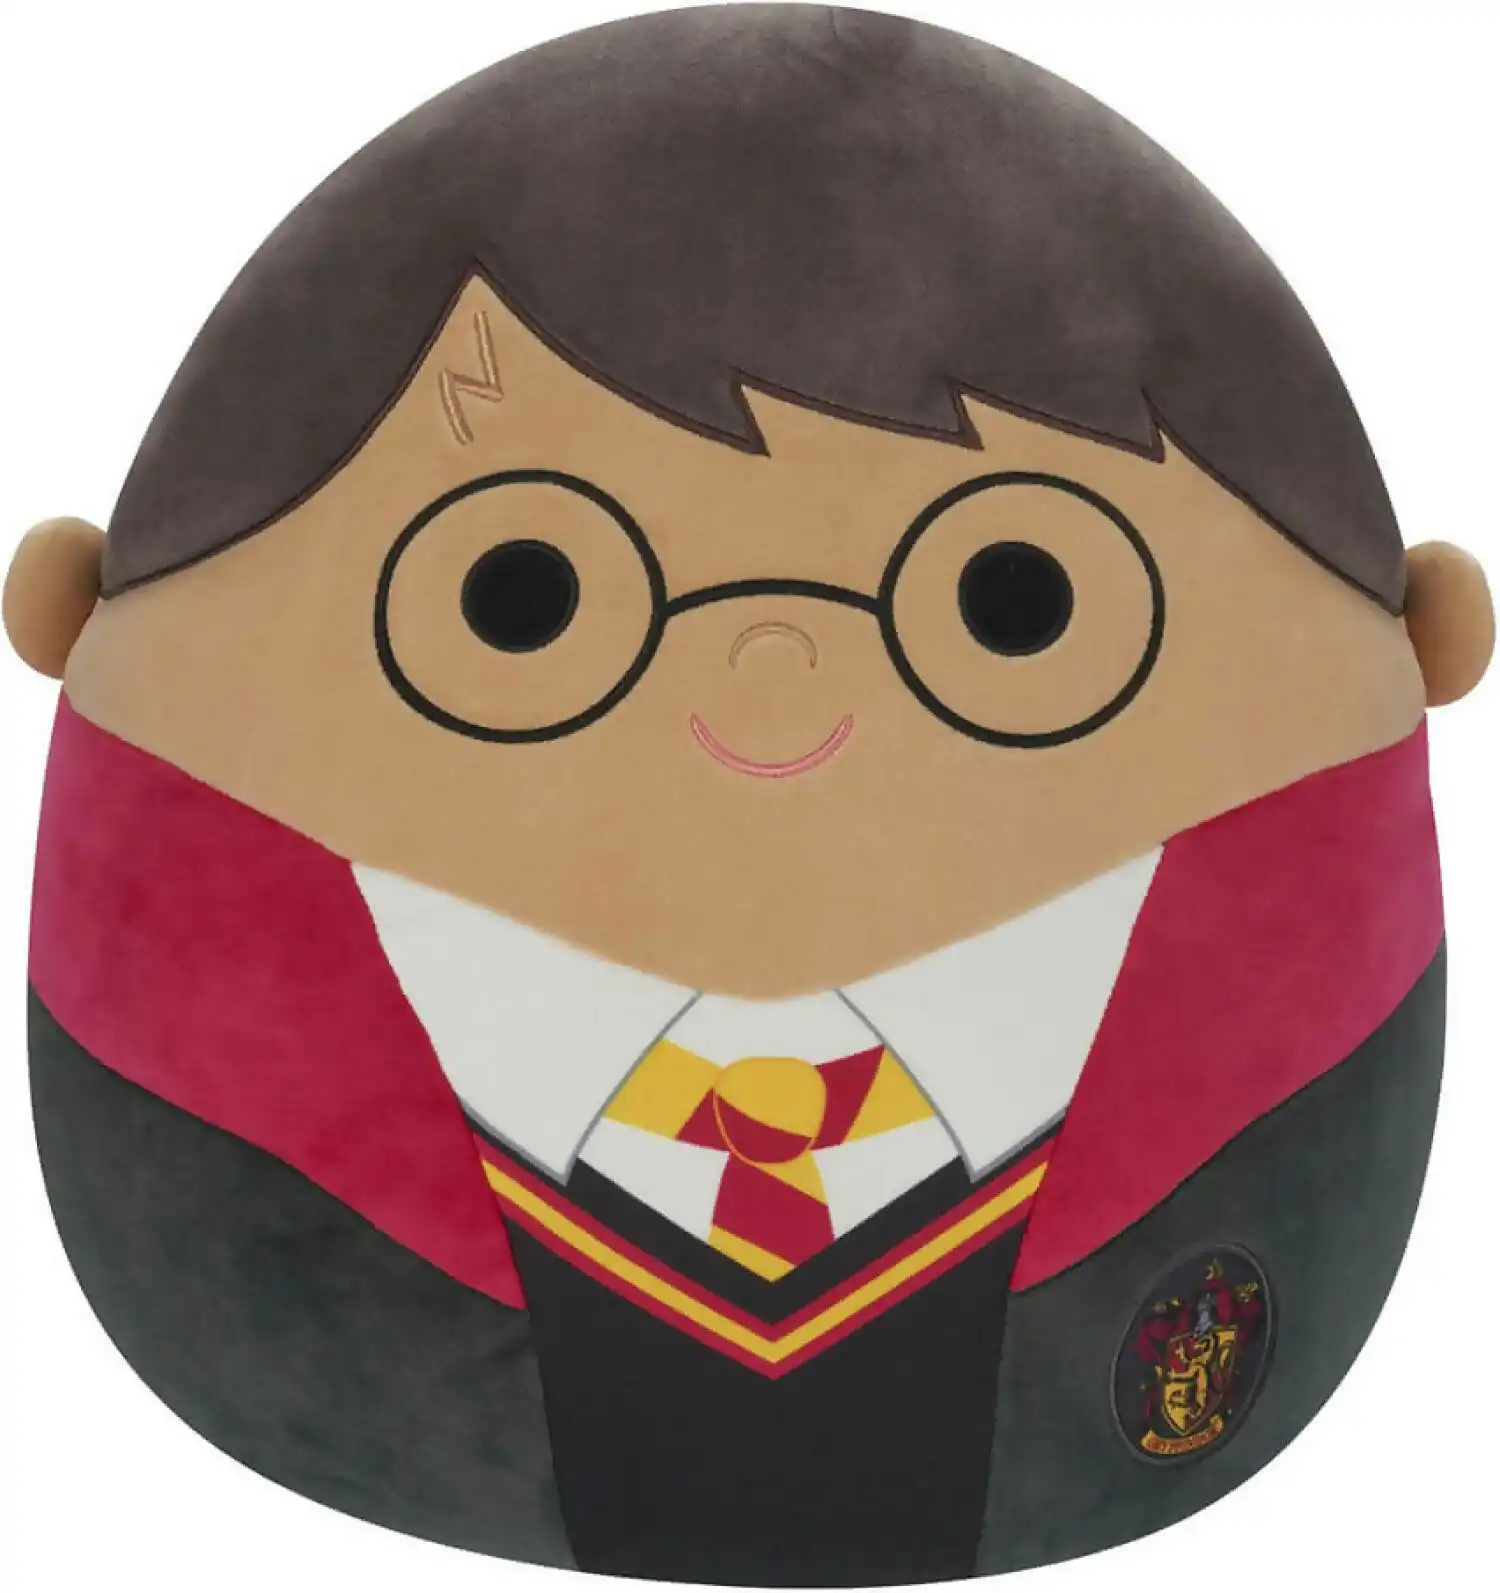 Squishmallows - Harry Potter 8-inch Plush - Harry Potter